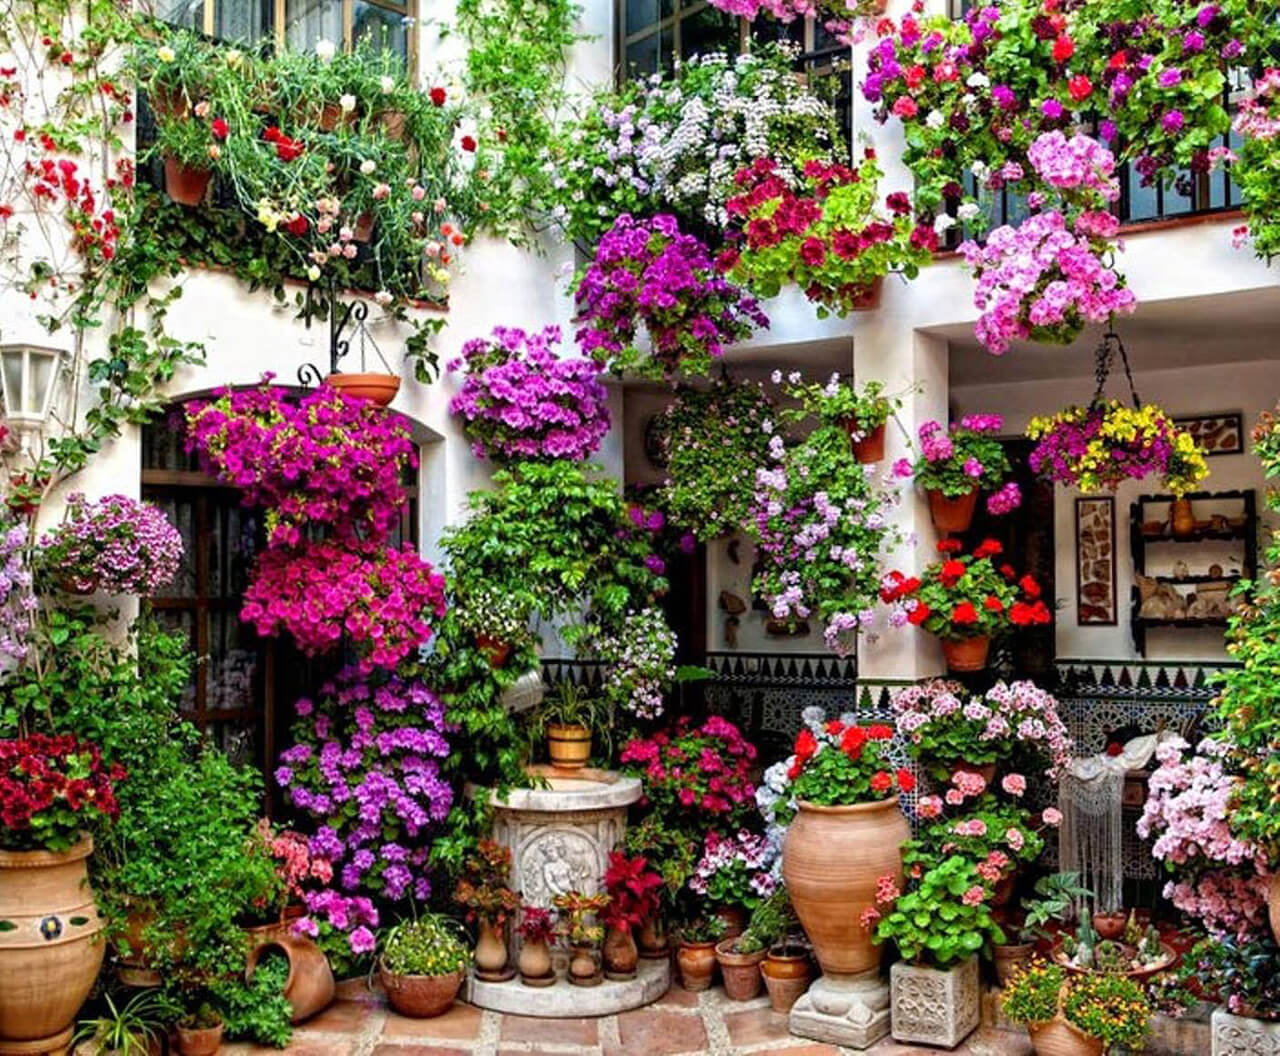 A Two-Story Hanging Garden of Flowers